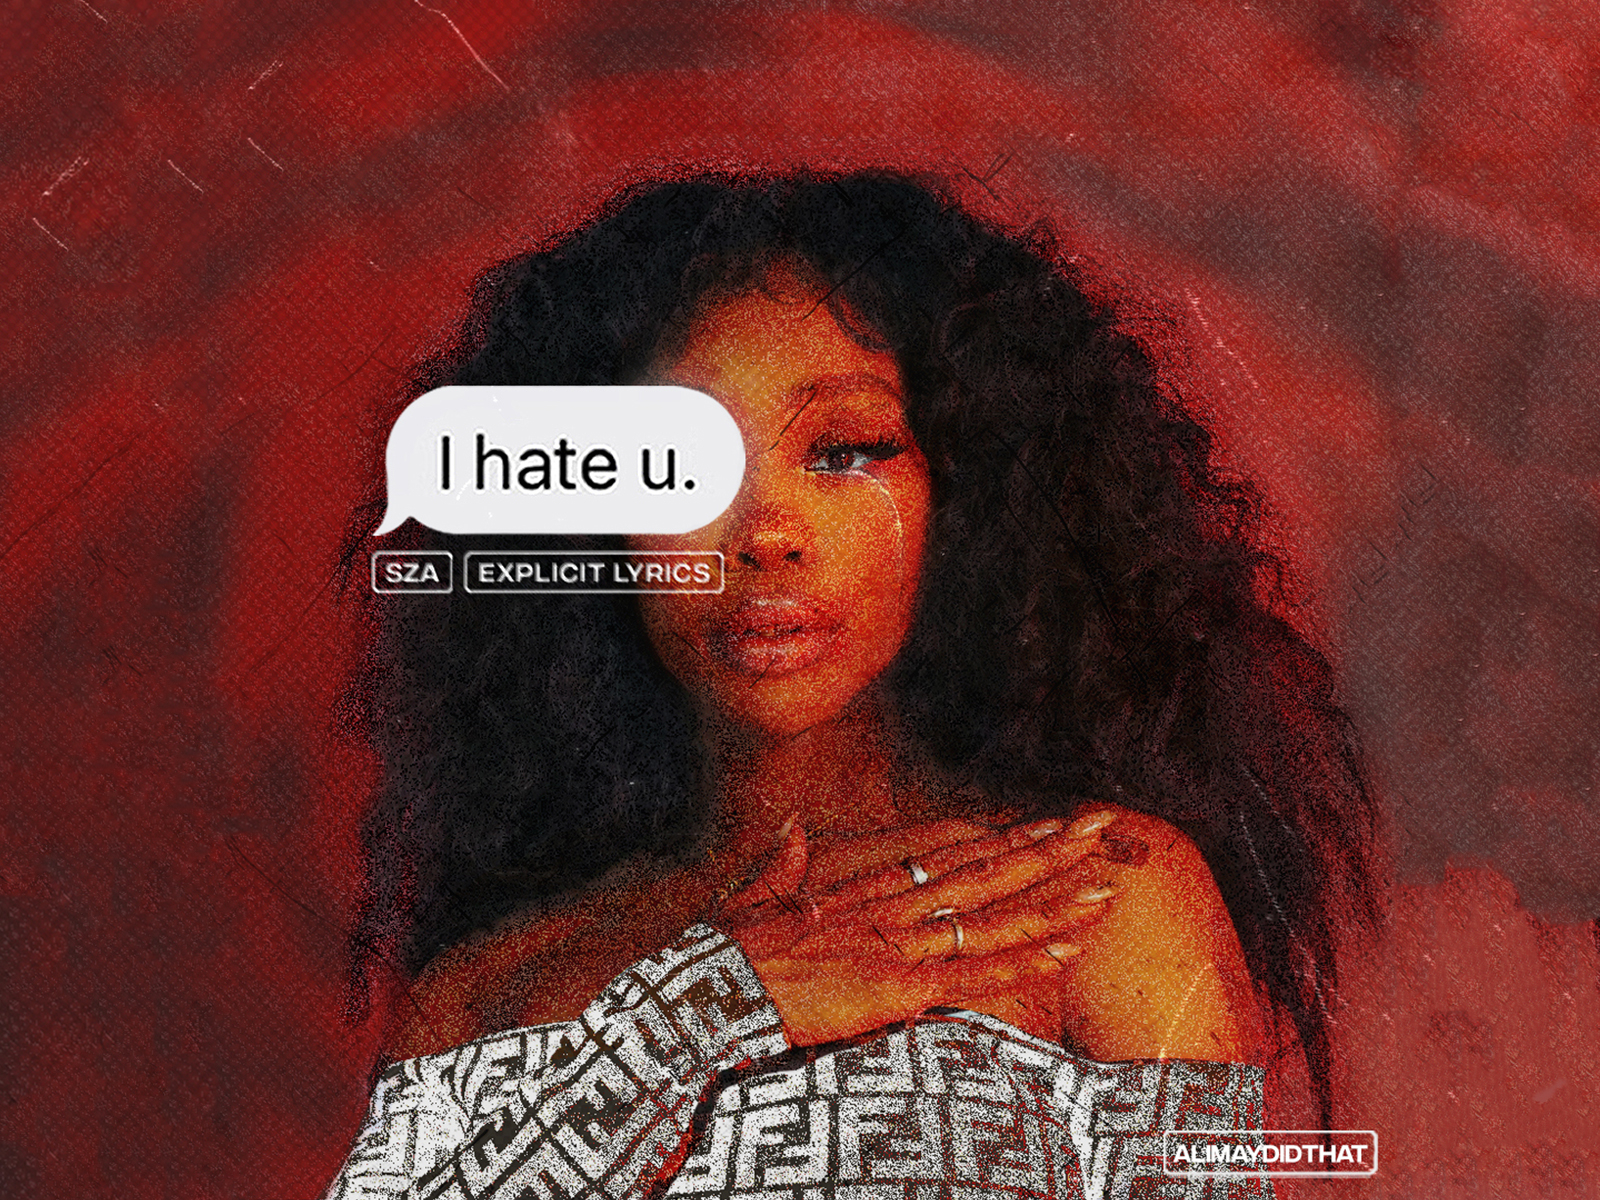 I Hate You (cover art)  SZA by ALIMAYDIDTHAT on Dribbble